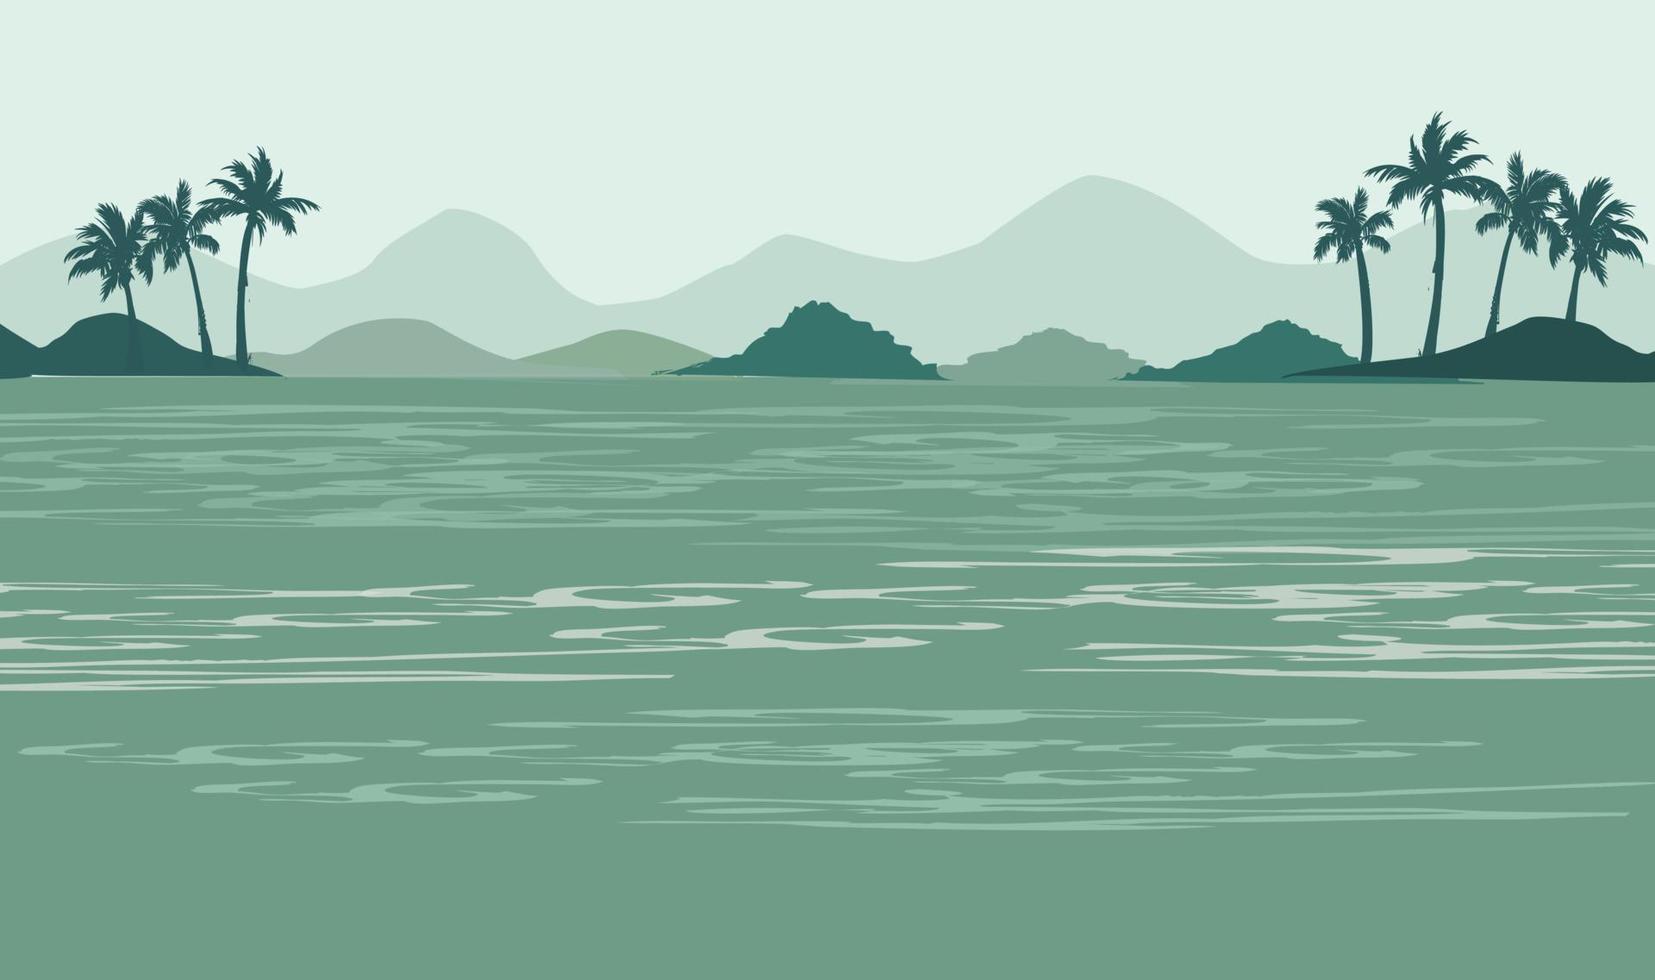 Sea view background vector